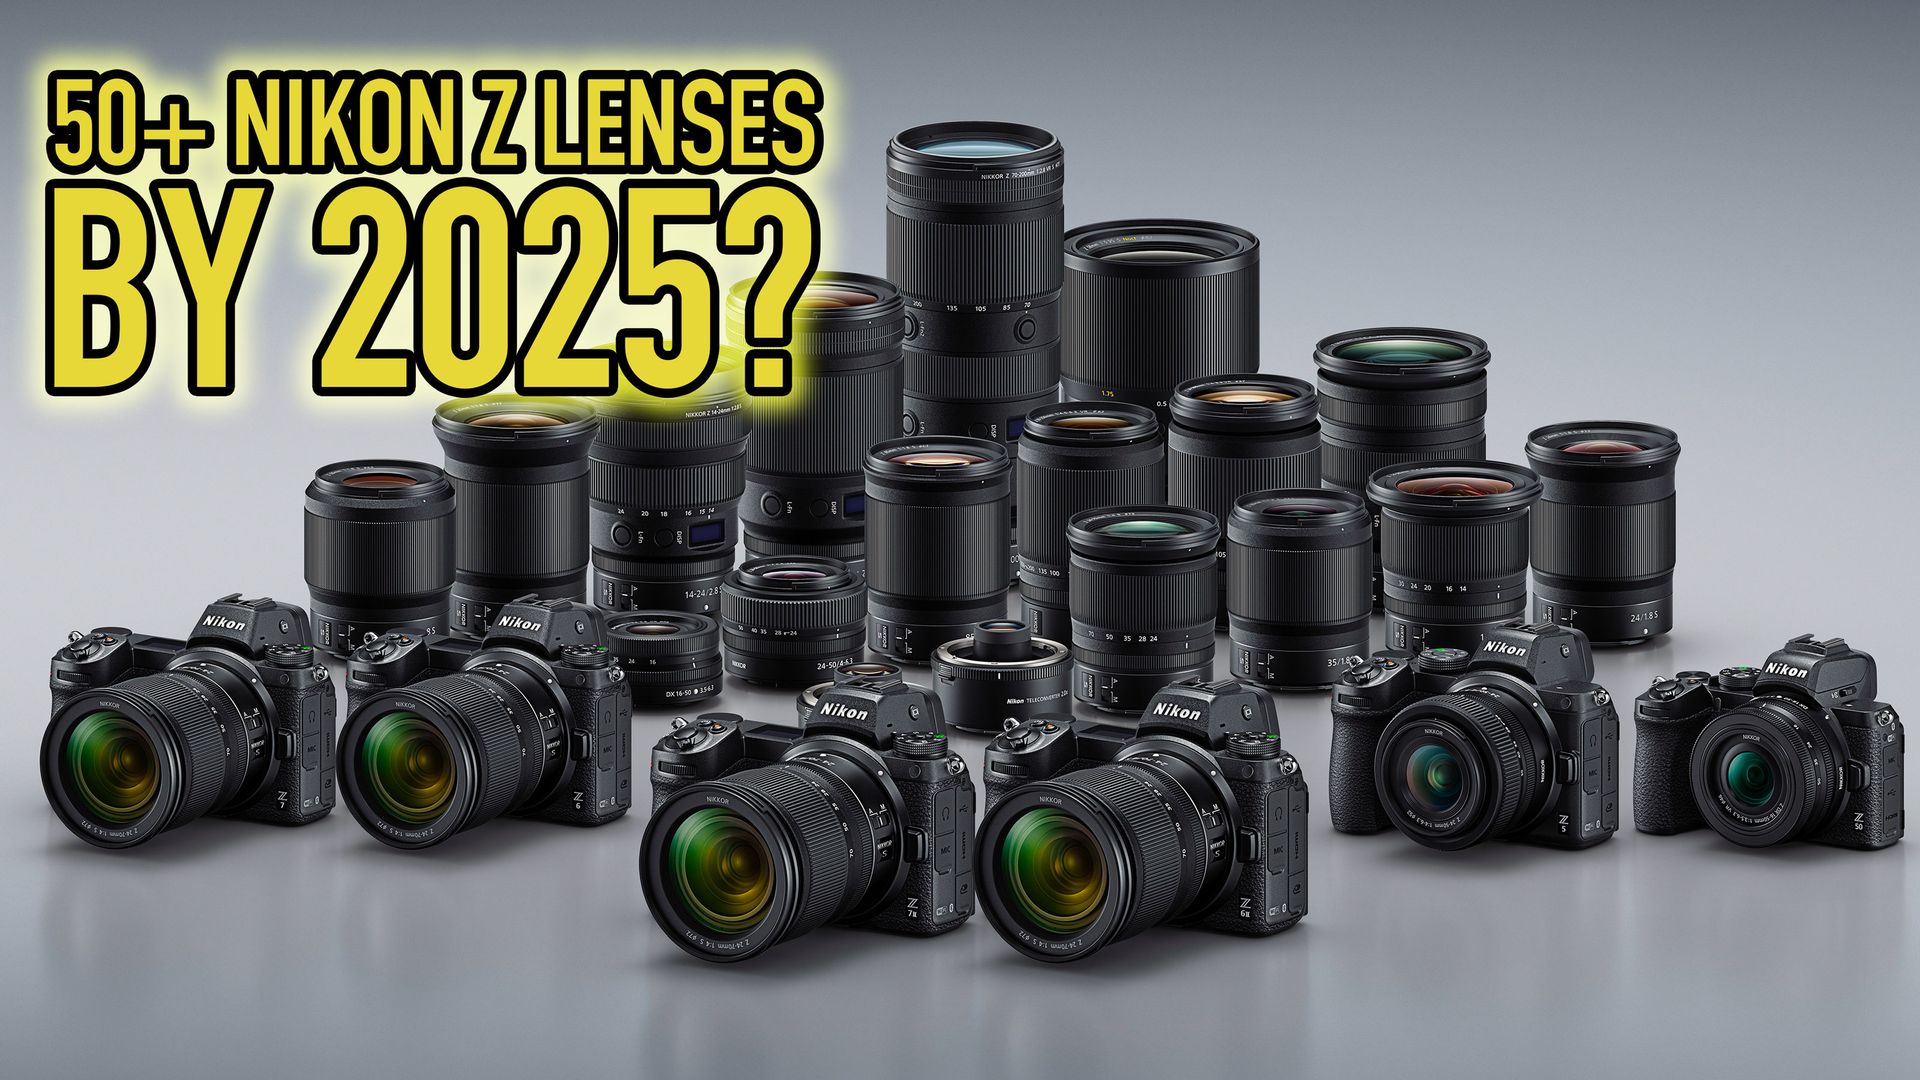 50+ Nikon Z lenses by 2025! This and more, in Nikon’s vision of the